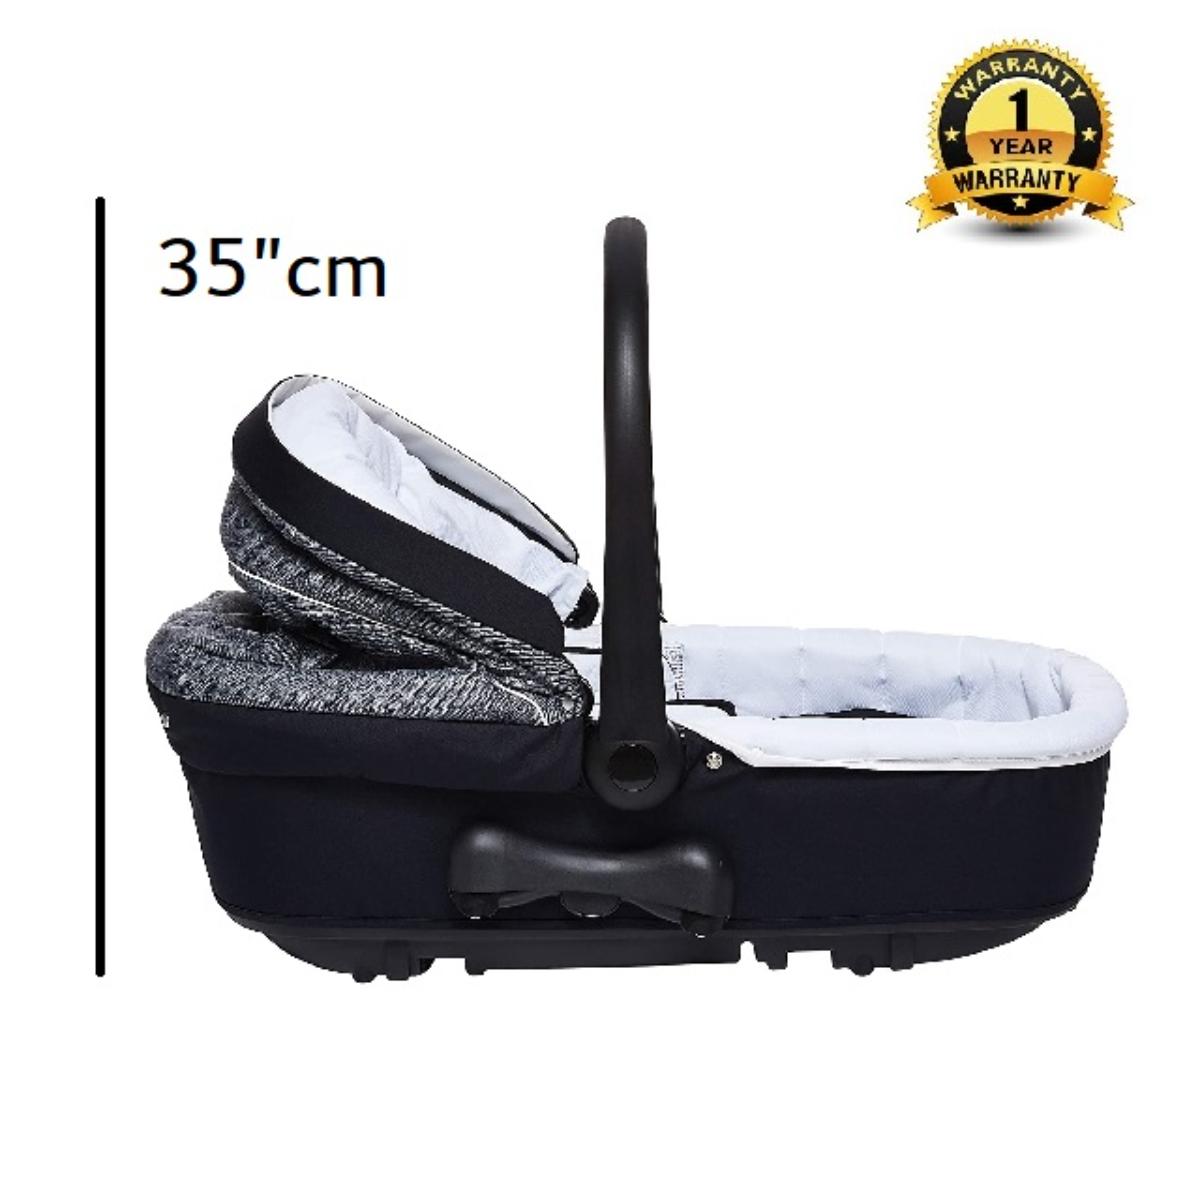 Cam - Coccola Baby infant Carrycot travel full body support, Beside sleeper, Bassinet, Portable bed, brethable cotton, Pressure protection, outdoor, picnic and travel - Blue